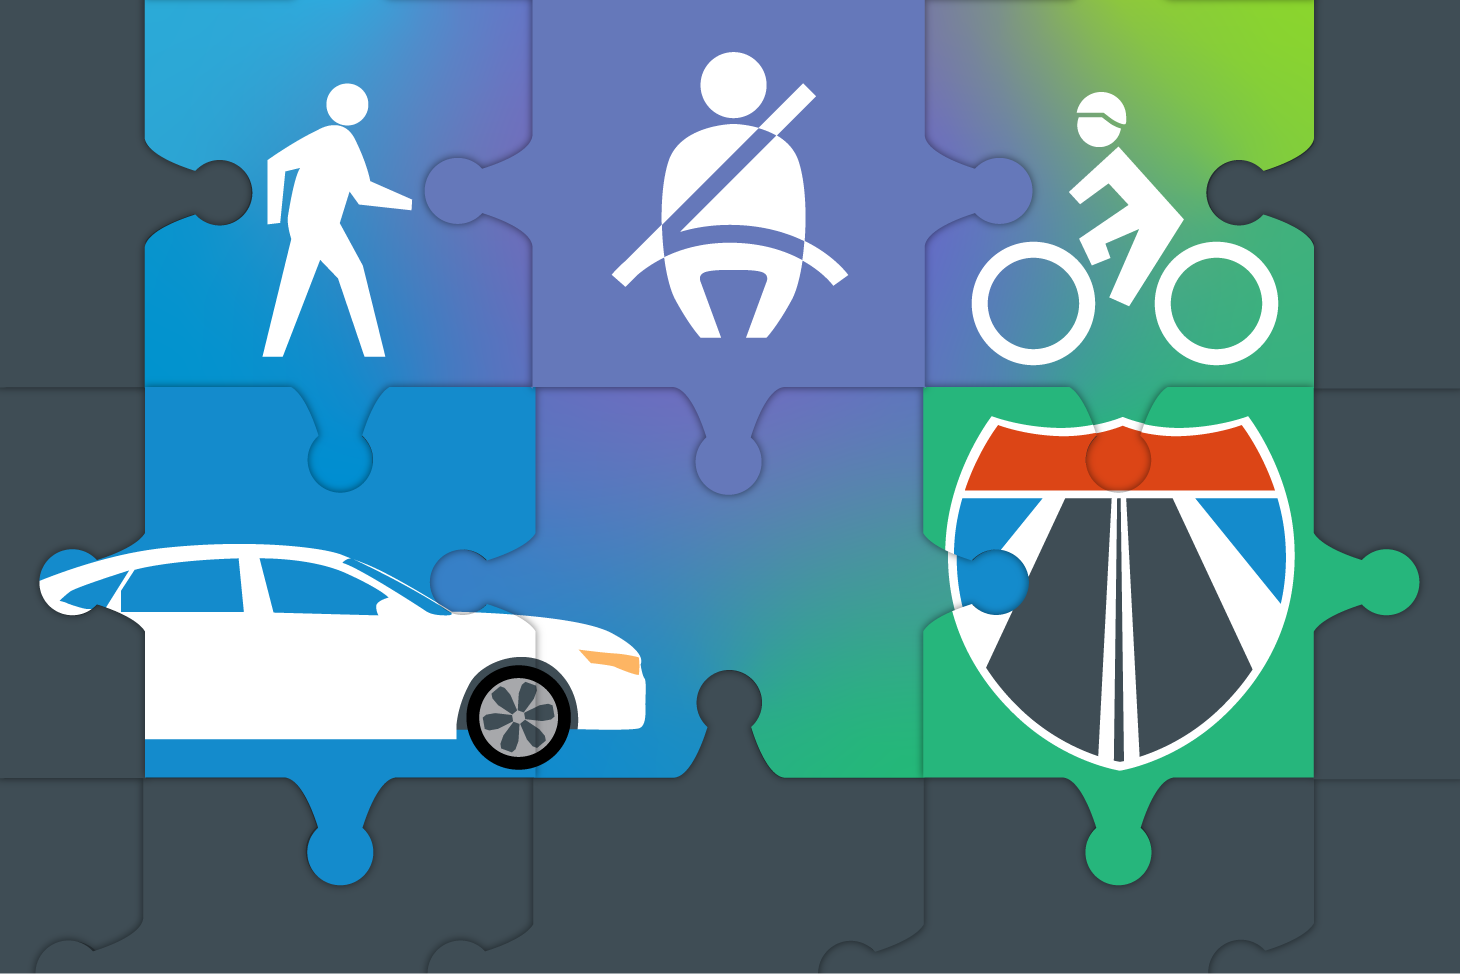 Image of connected puzzle pieces with icons for a pedestrian, seat belt, bicyclist, and car on them.